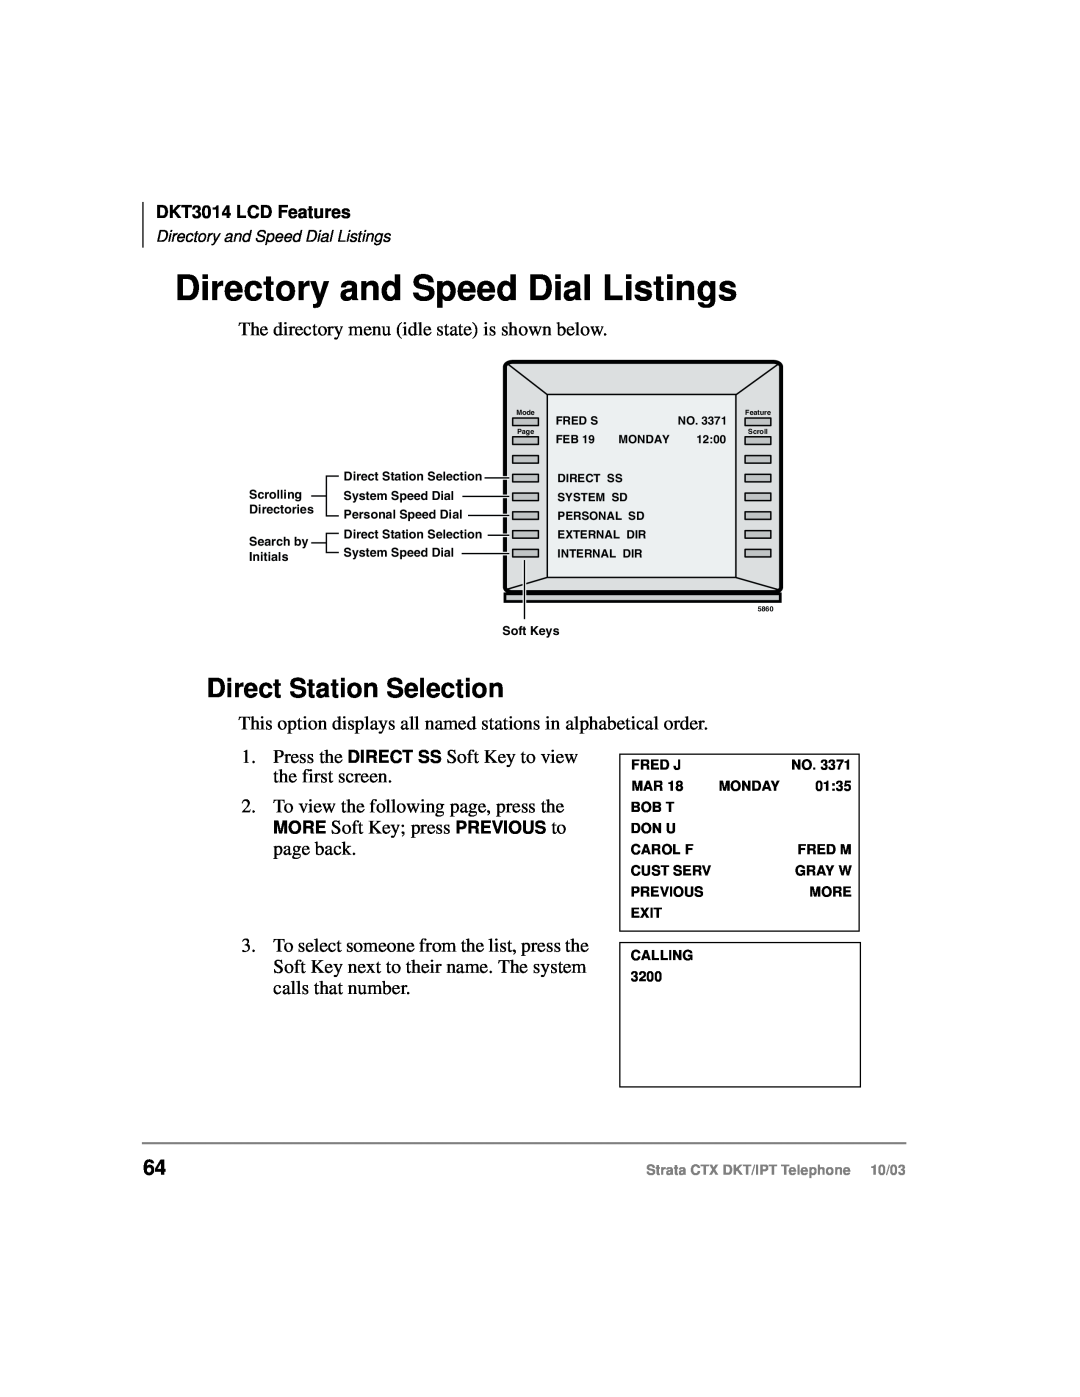 Toshiba IPT, DKT manual Directory and Speed Dial Listings, Direct Station Selection 